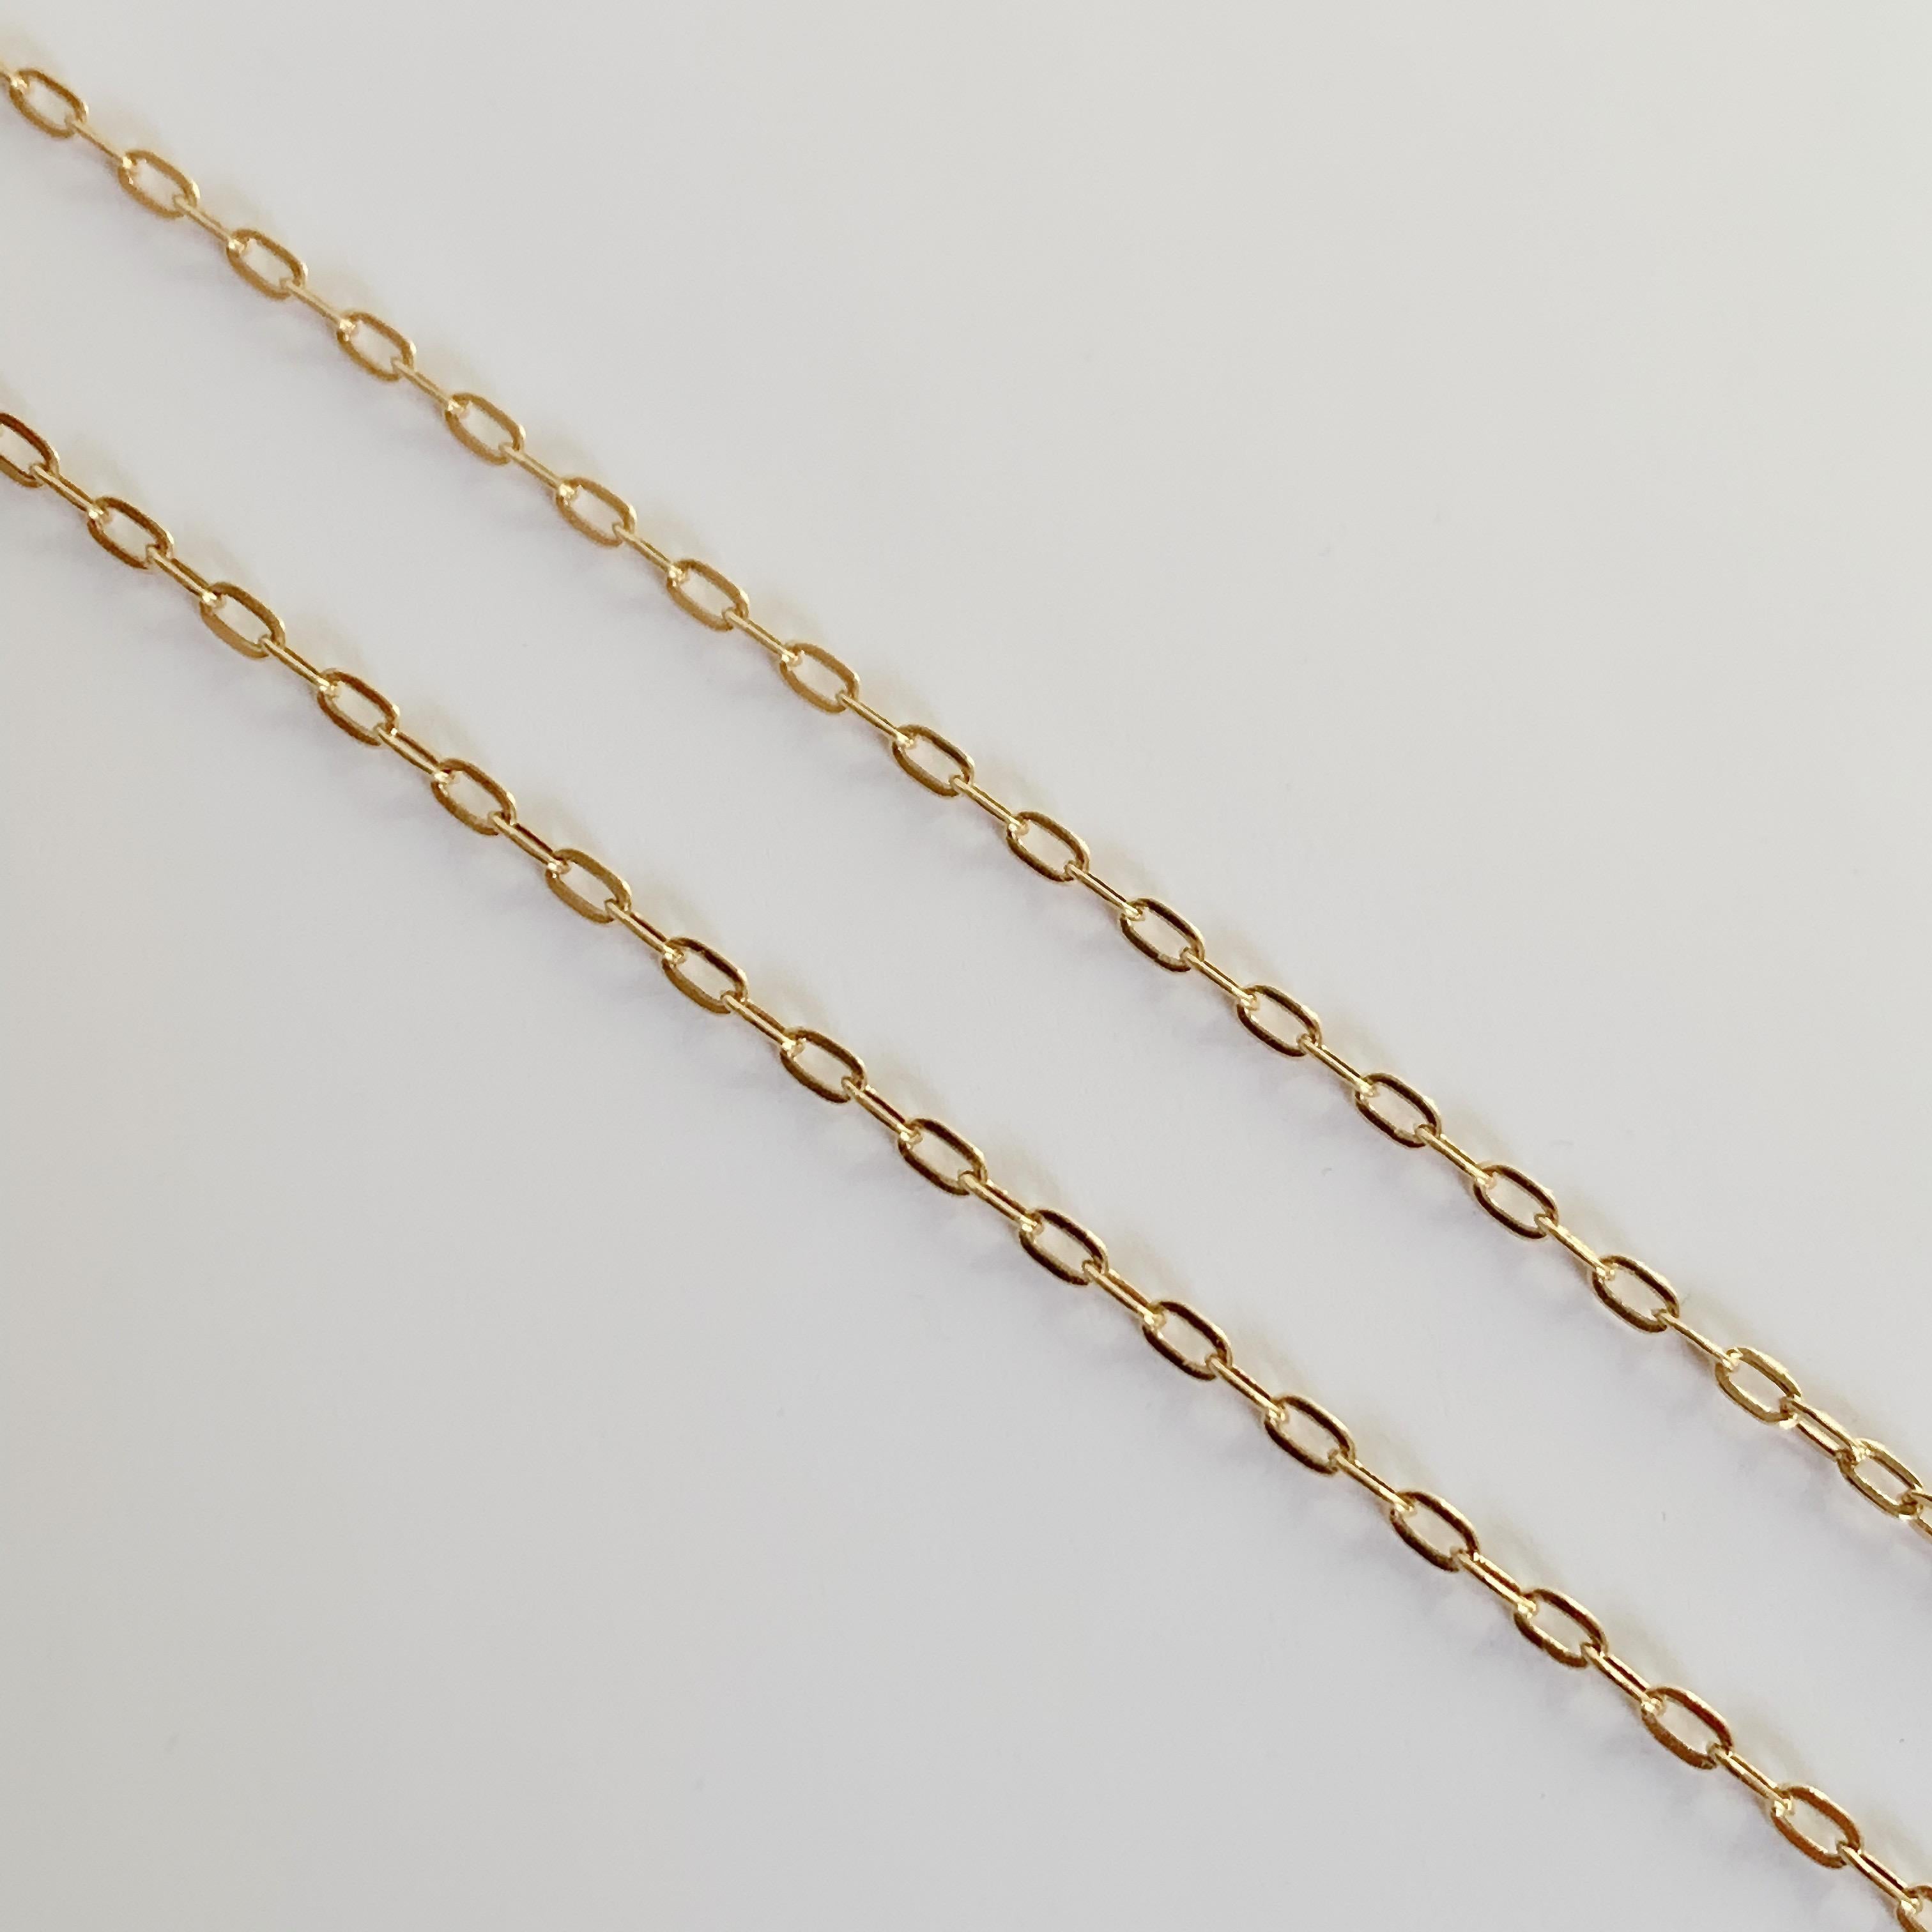 This chain necklace is made of 18 Karat yellow gold.
Gauge:  2 mm
Length : 40.00 cm 
Hallmark: London’s  Goldsmiths’ Company –  Assay Office ( Laser Mark)
All our jewellery are new and have never been previously owned or worn.
We are a member of the